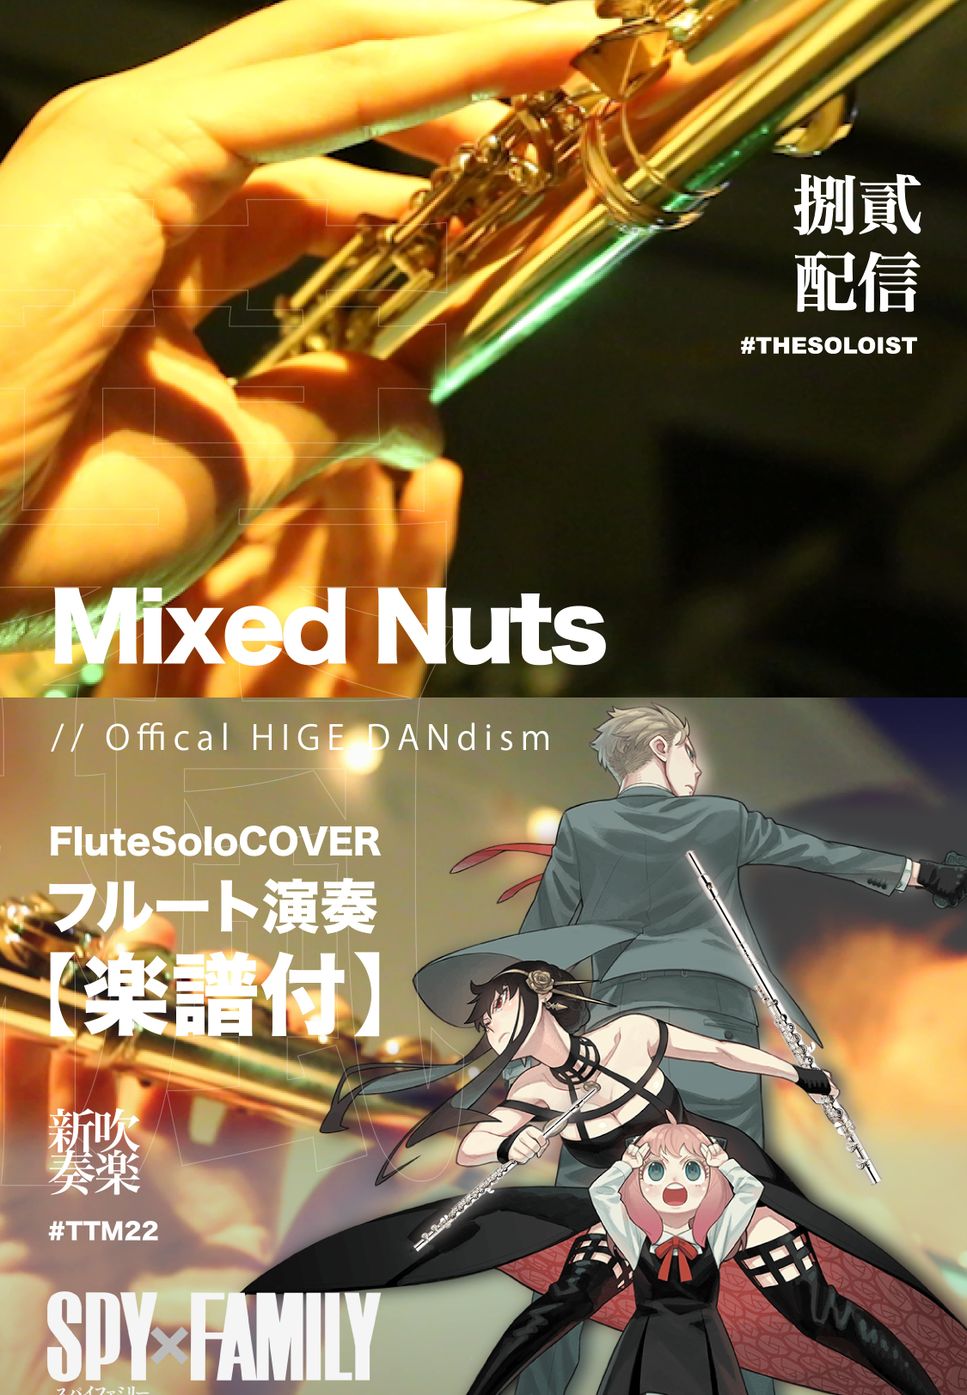 Spy X Family - Mixed Nuts (Flute Solo) by FungYip